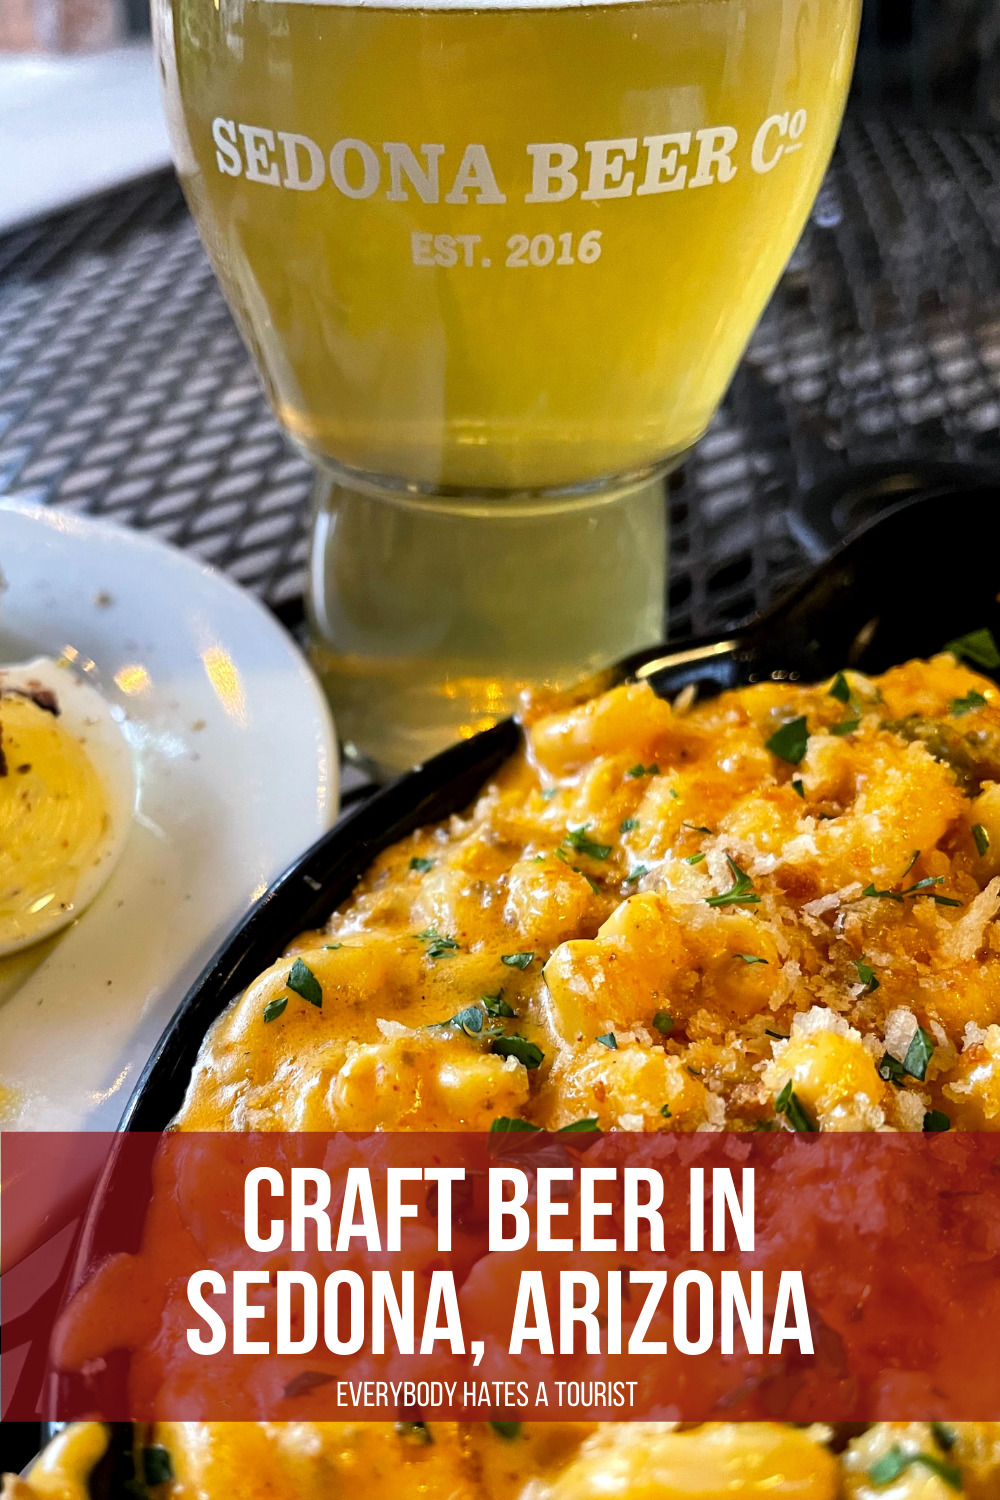 craft beer in sedona arizona - 5 great places for craft beer in Sedona, Arizona